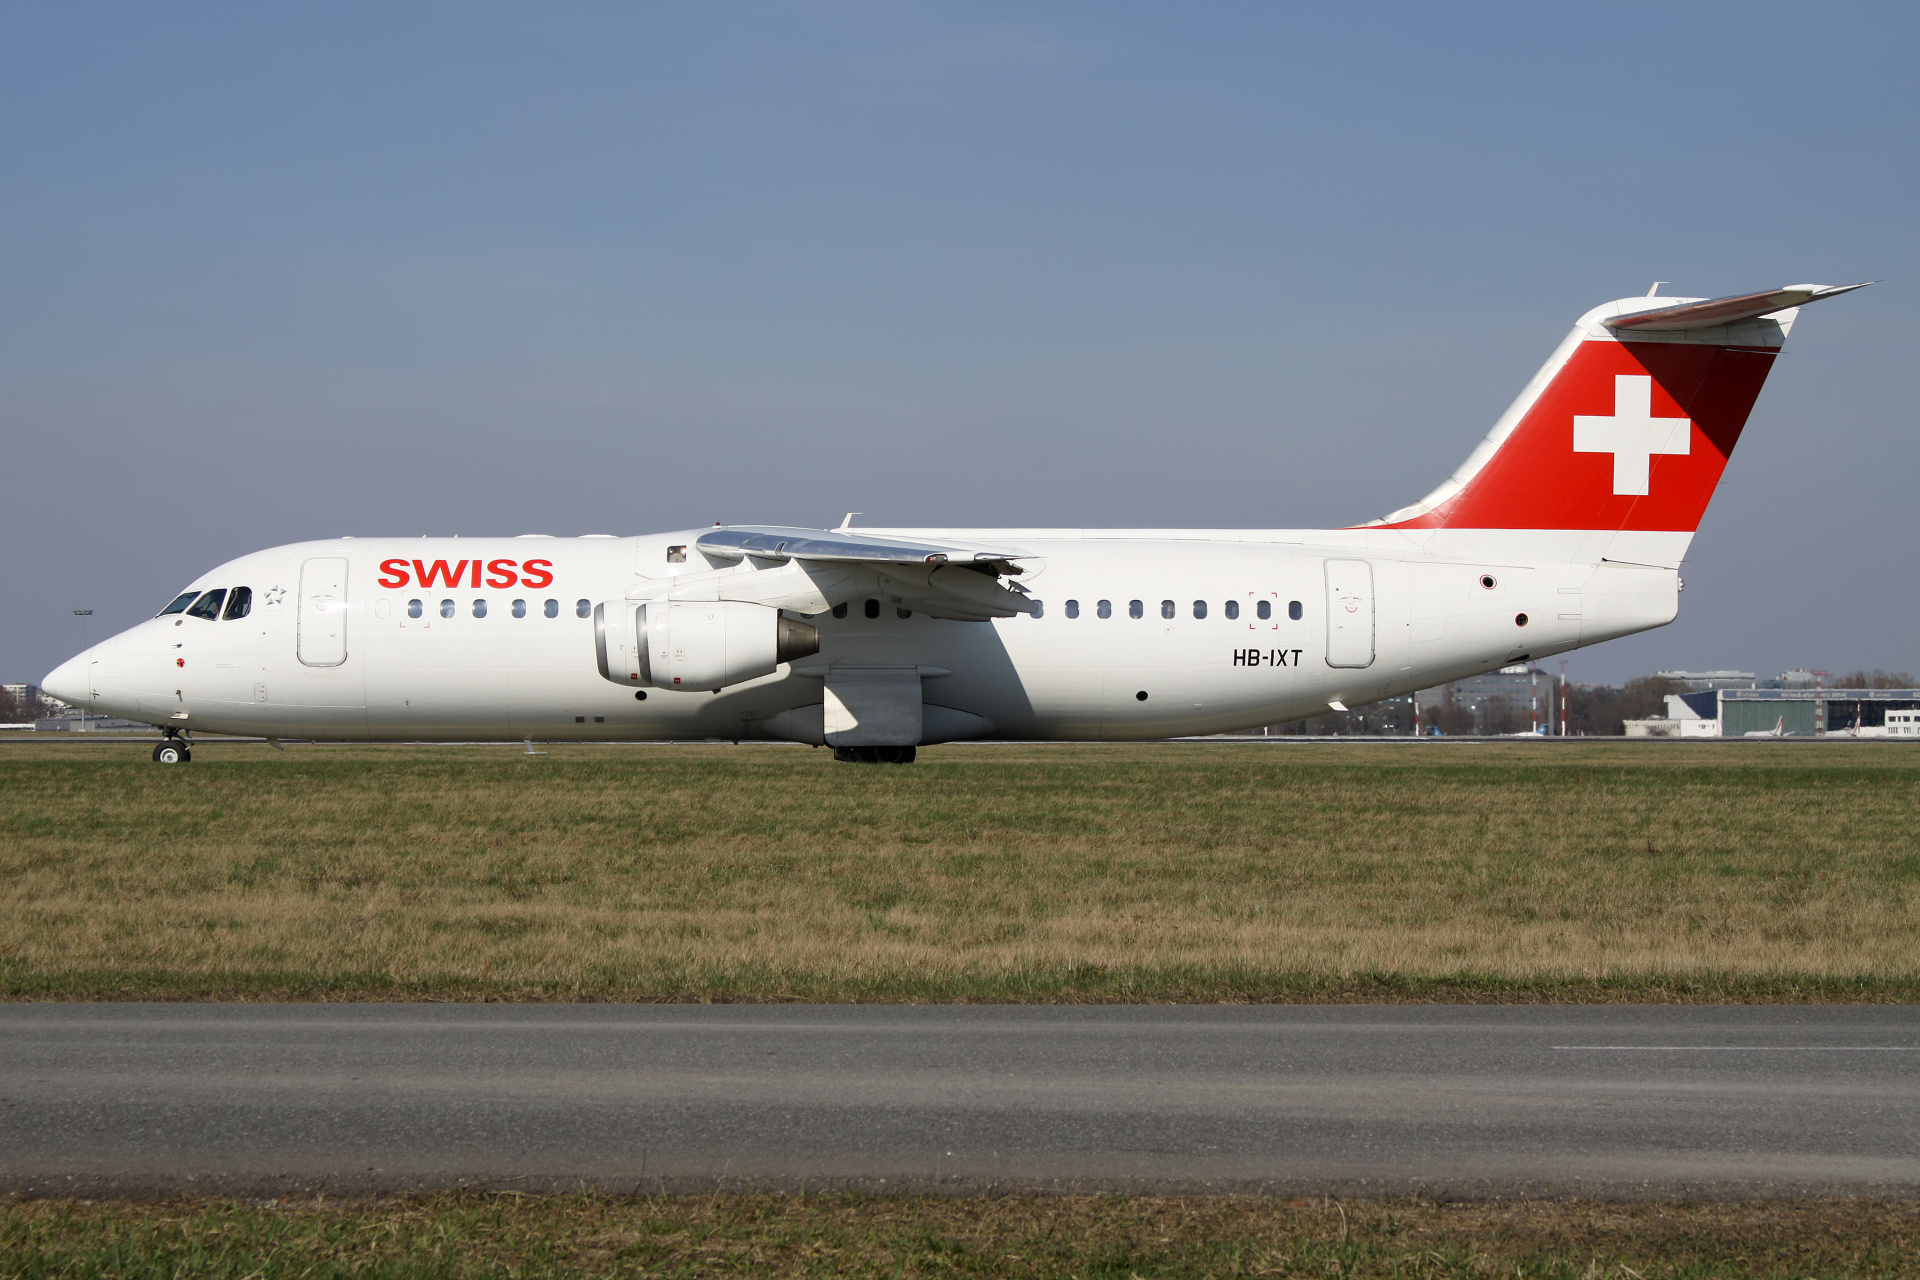 HB-IXT (Aircraft » EPWA Spotting » BAe 146 and revisions » Avro RJ100 » Swiss Global Air Lines)